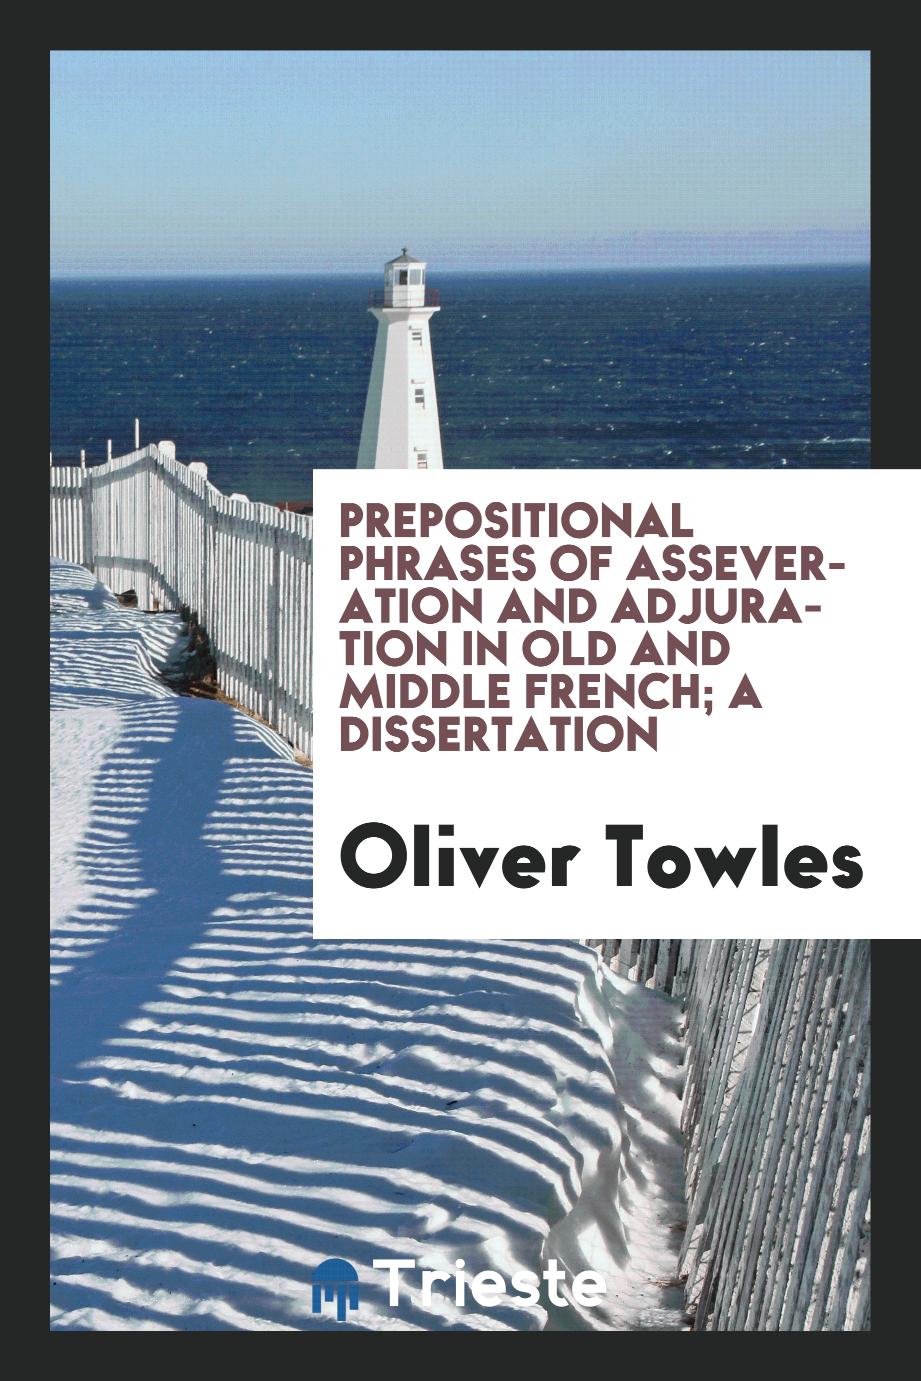 Prepositional phrases of asseveration and adjuration in Old and Middle French; a dissertation